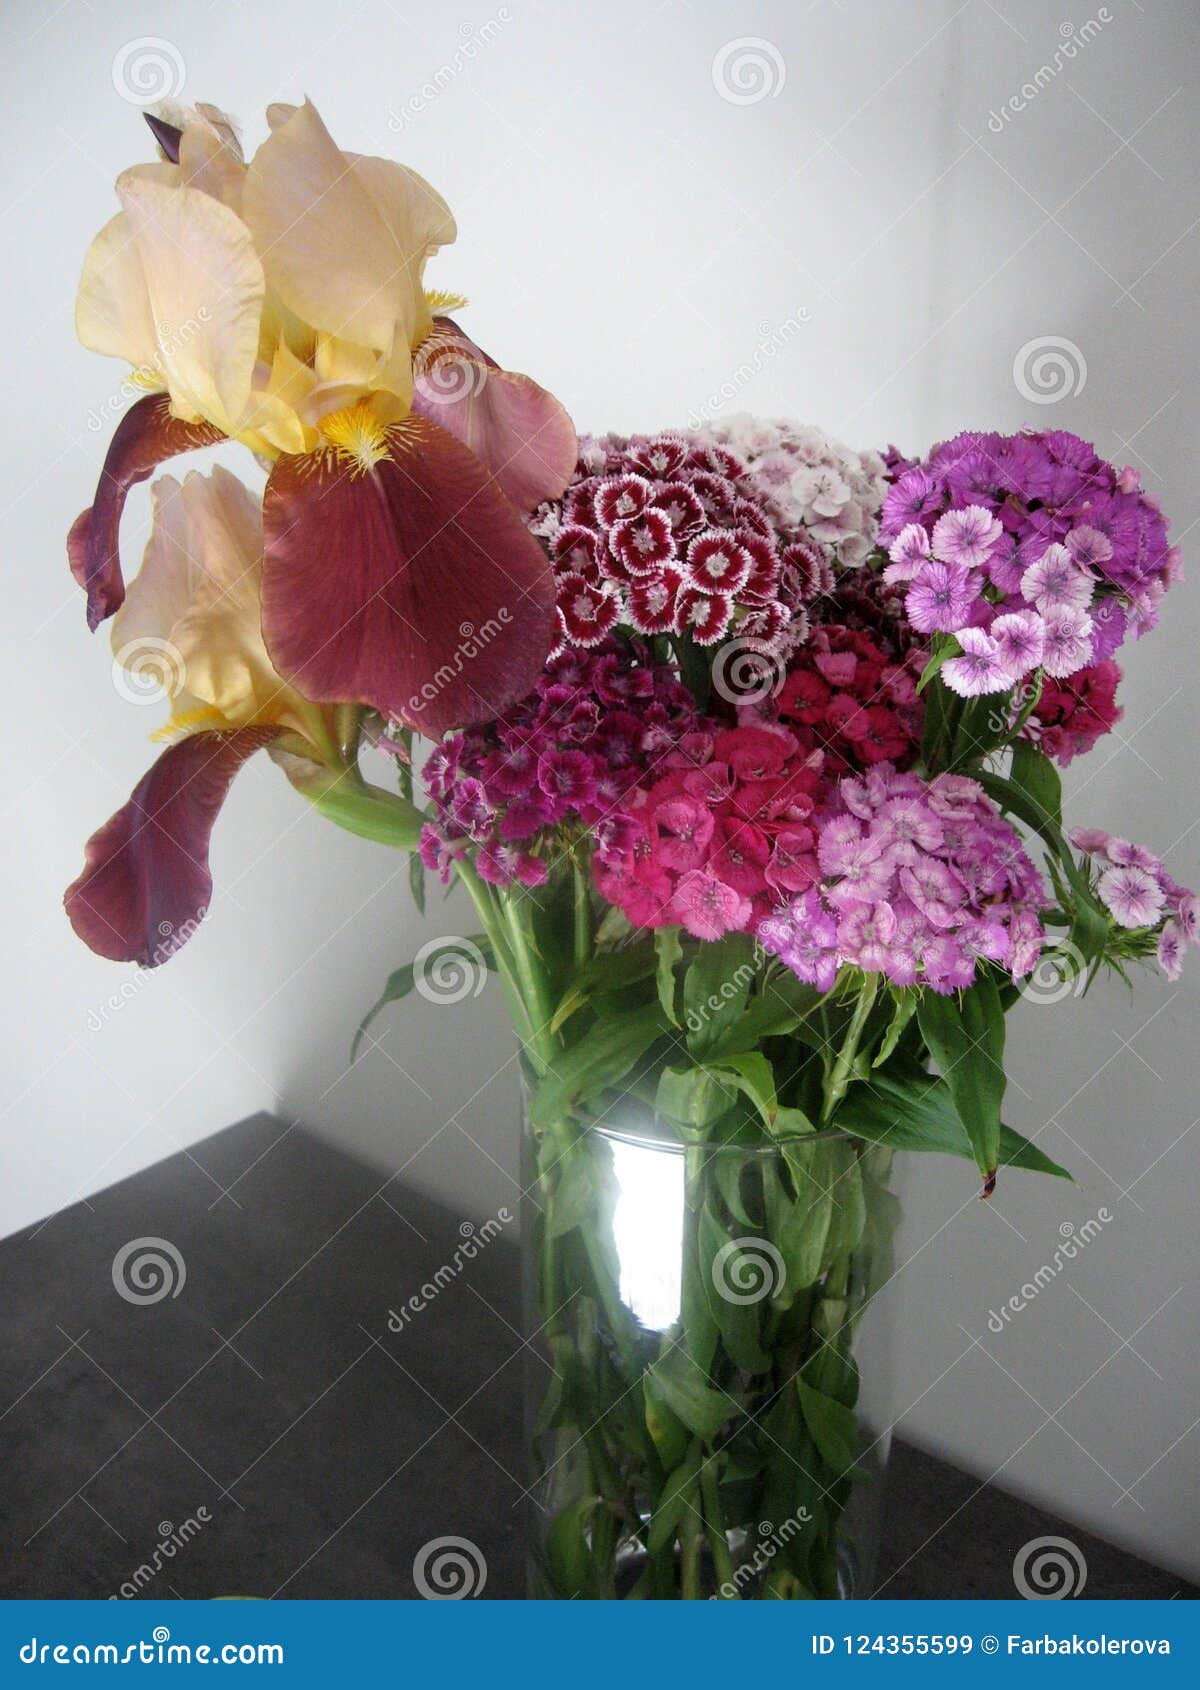 Beautiful Carnation Flowers in a Vase on a Table . Bouquet of Violet ...